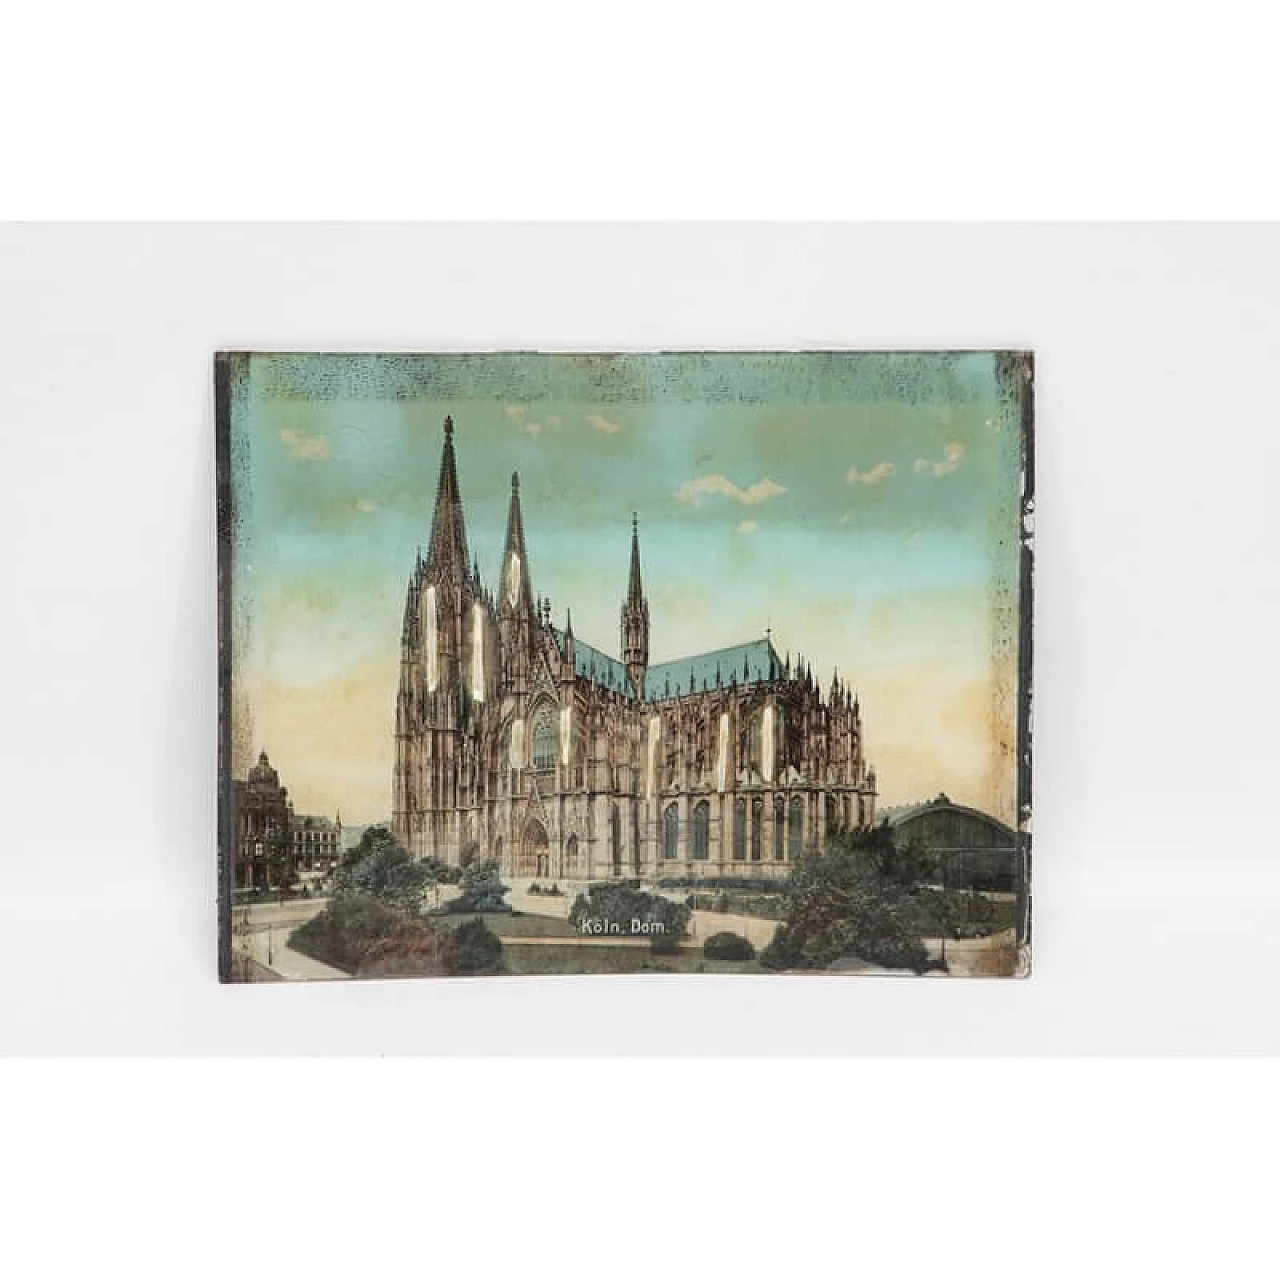 Print of a view of a cathedral on domed glass with inlays of mother-of-pearl, 19th century 1470138